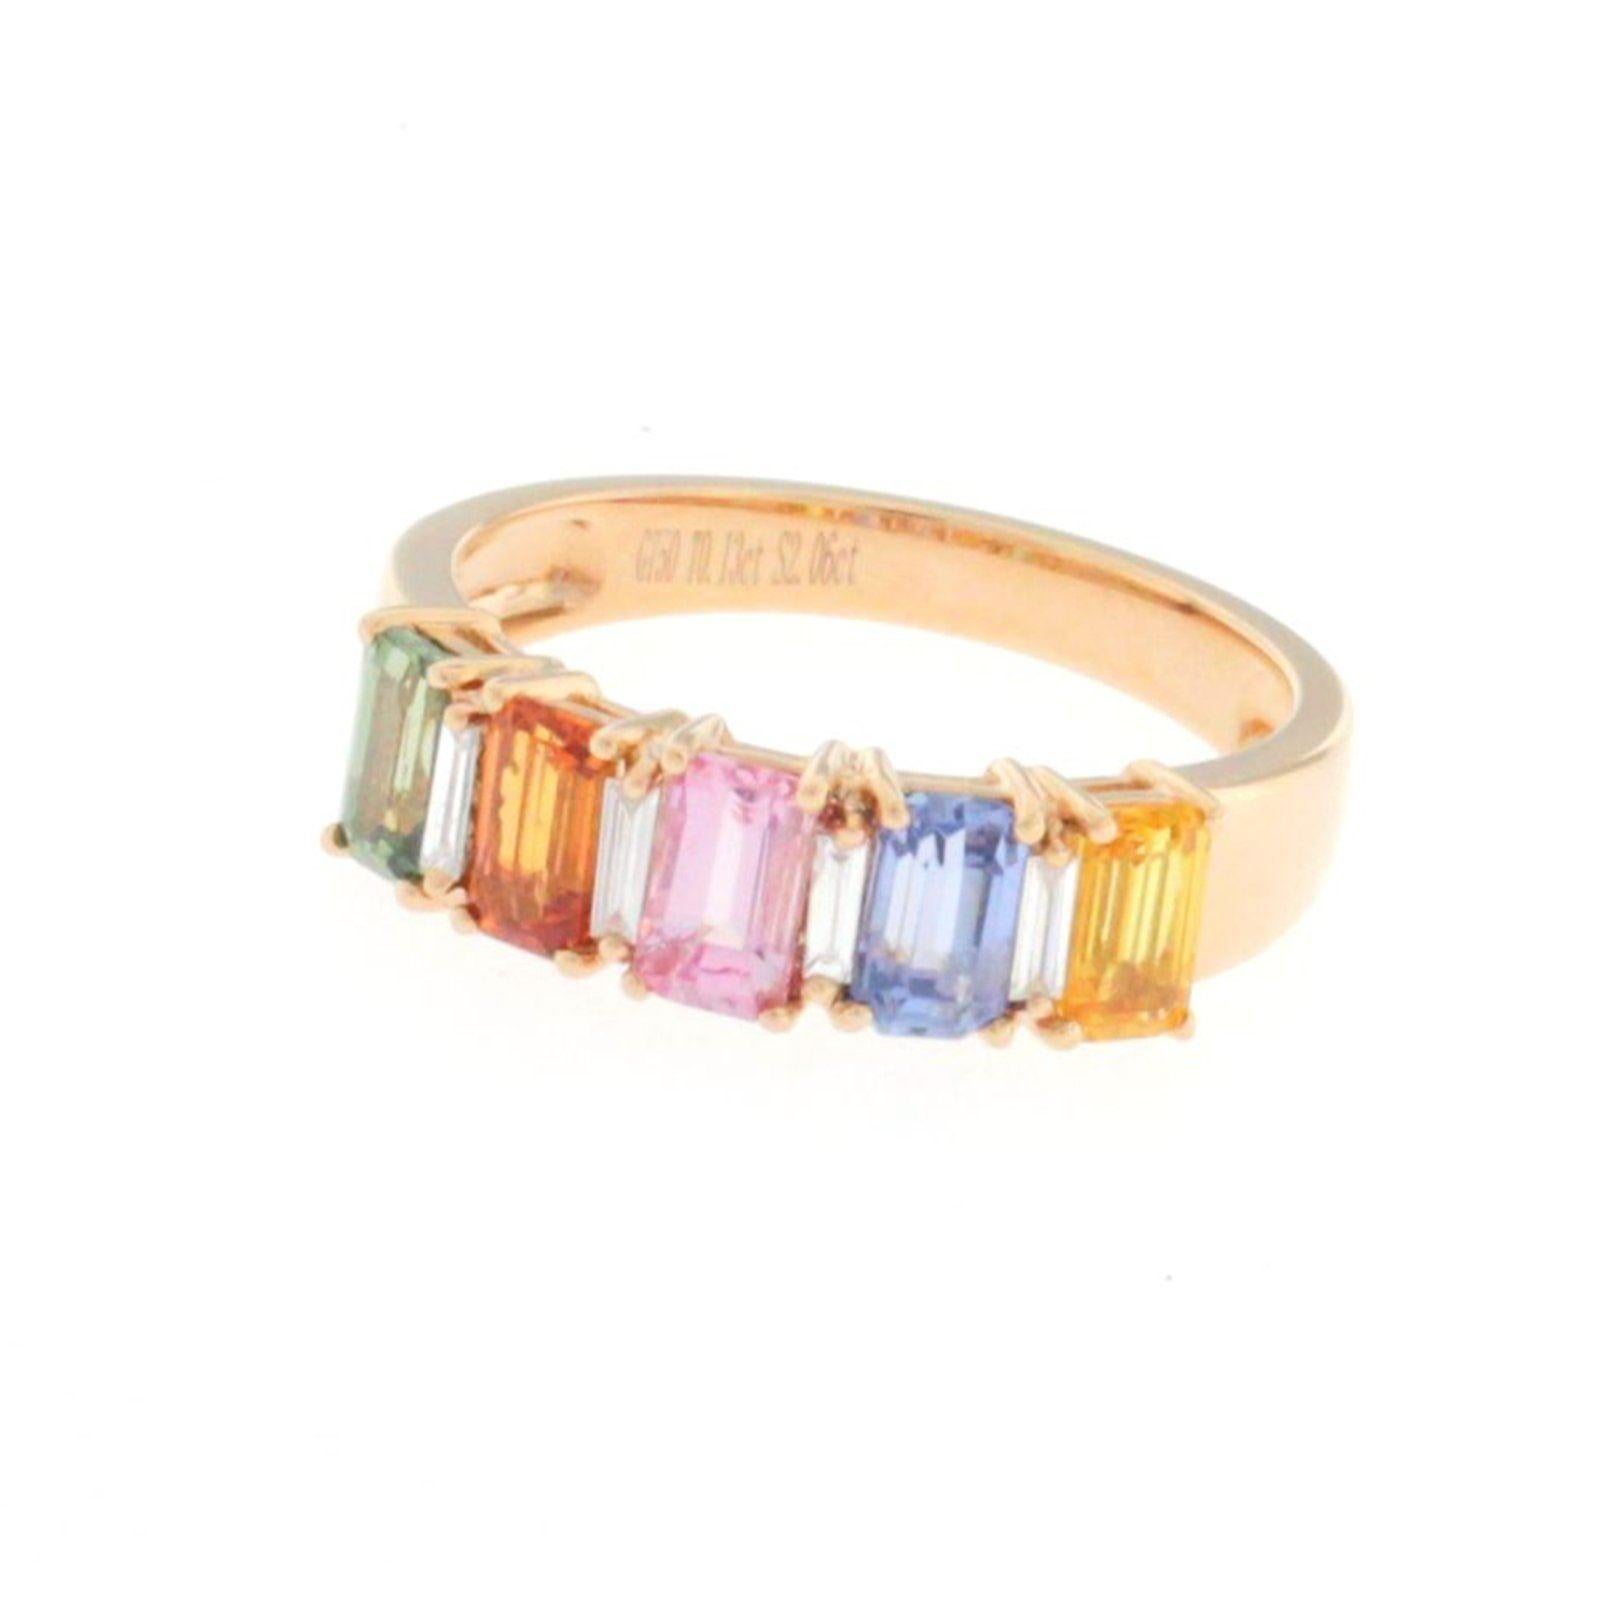 0.06 Multi Sapphires and 0.13 Carat Diamonds in 18 Karat Gold Wedding Ring For Sale 1